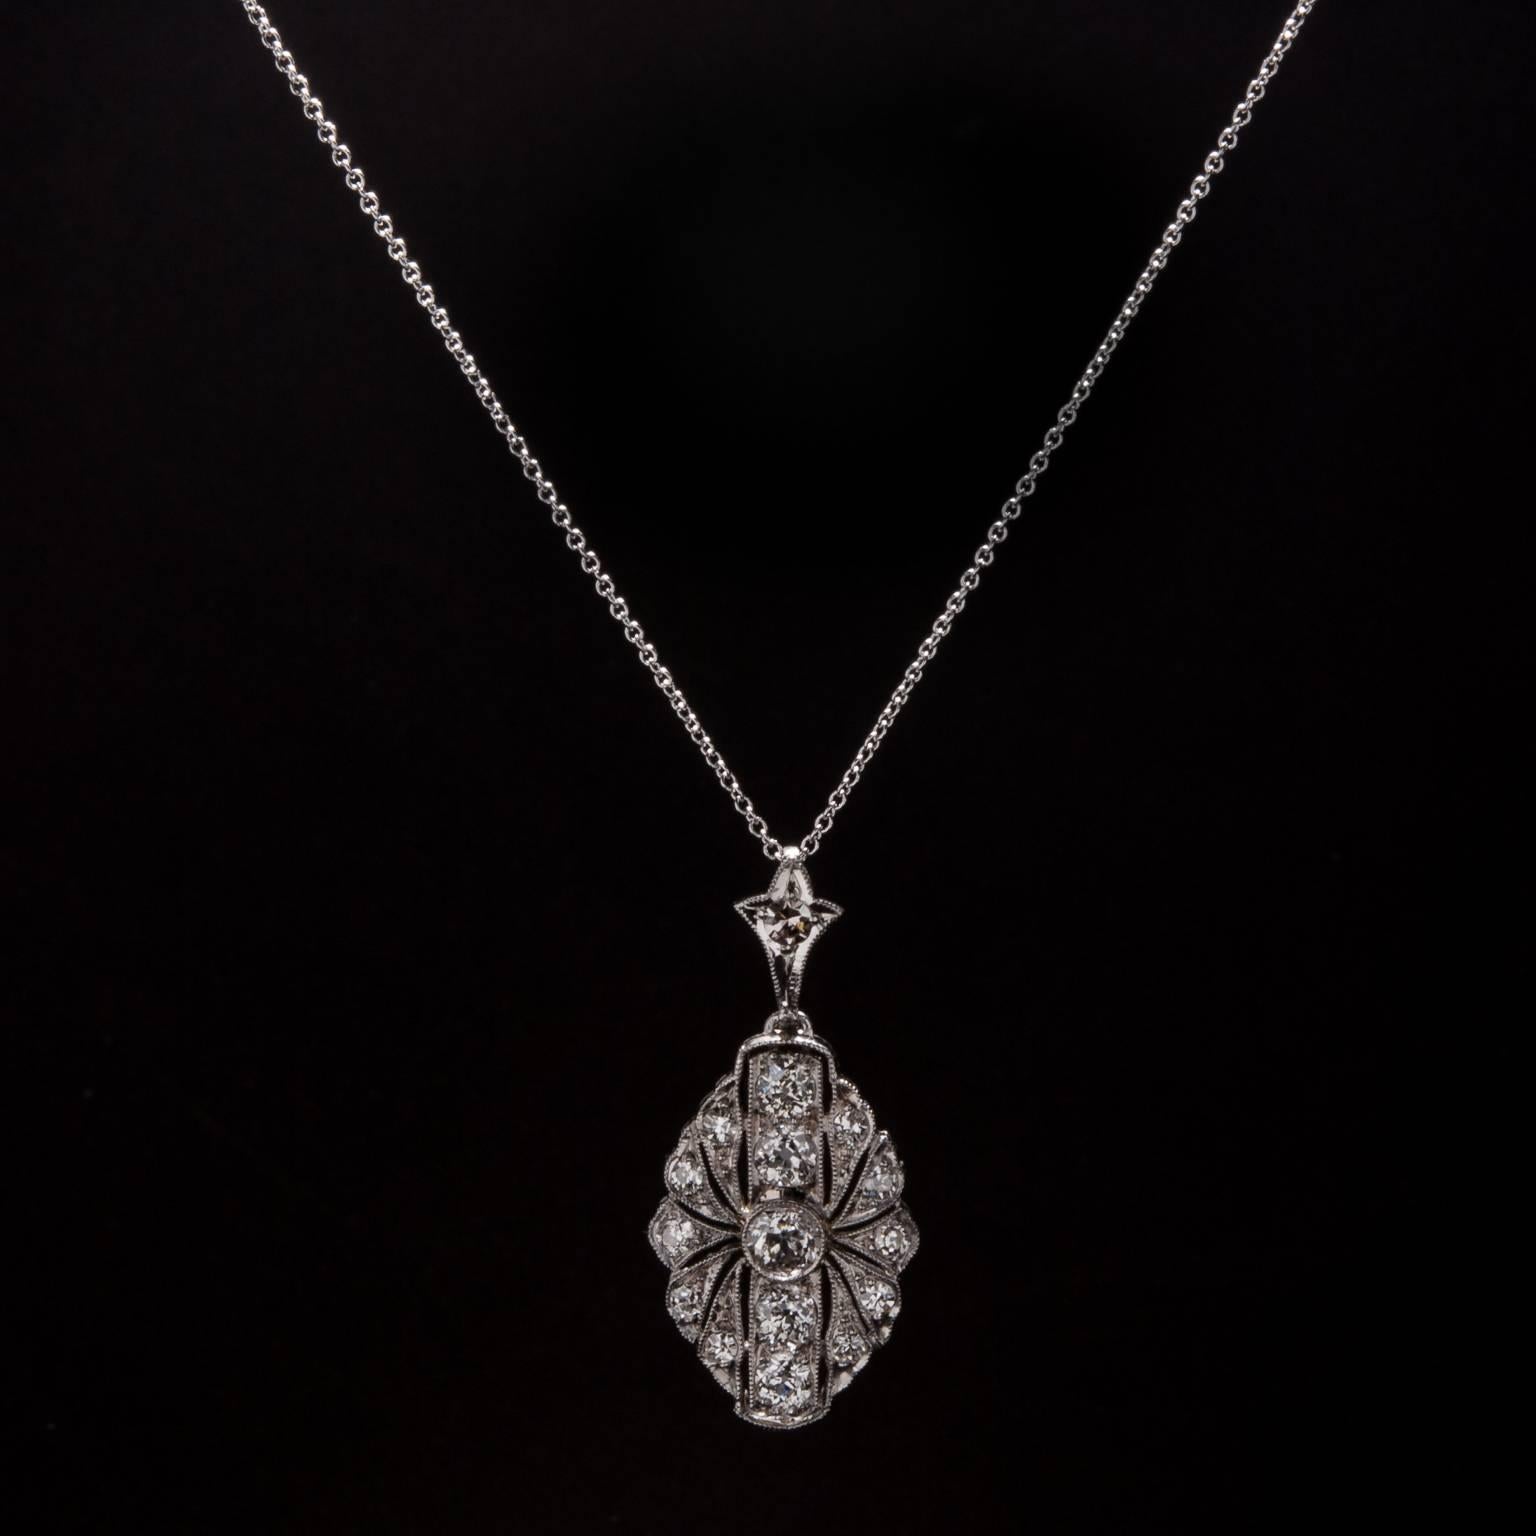 This lovely Art Deco era pendant features a .25 carat old European cut center diamond and .96 total carats of accent diamonds. This piece was crafted in platinum circa 1920 and come on an 18 inch platinum chain.